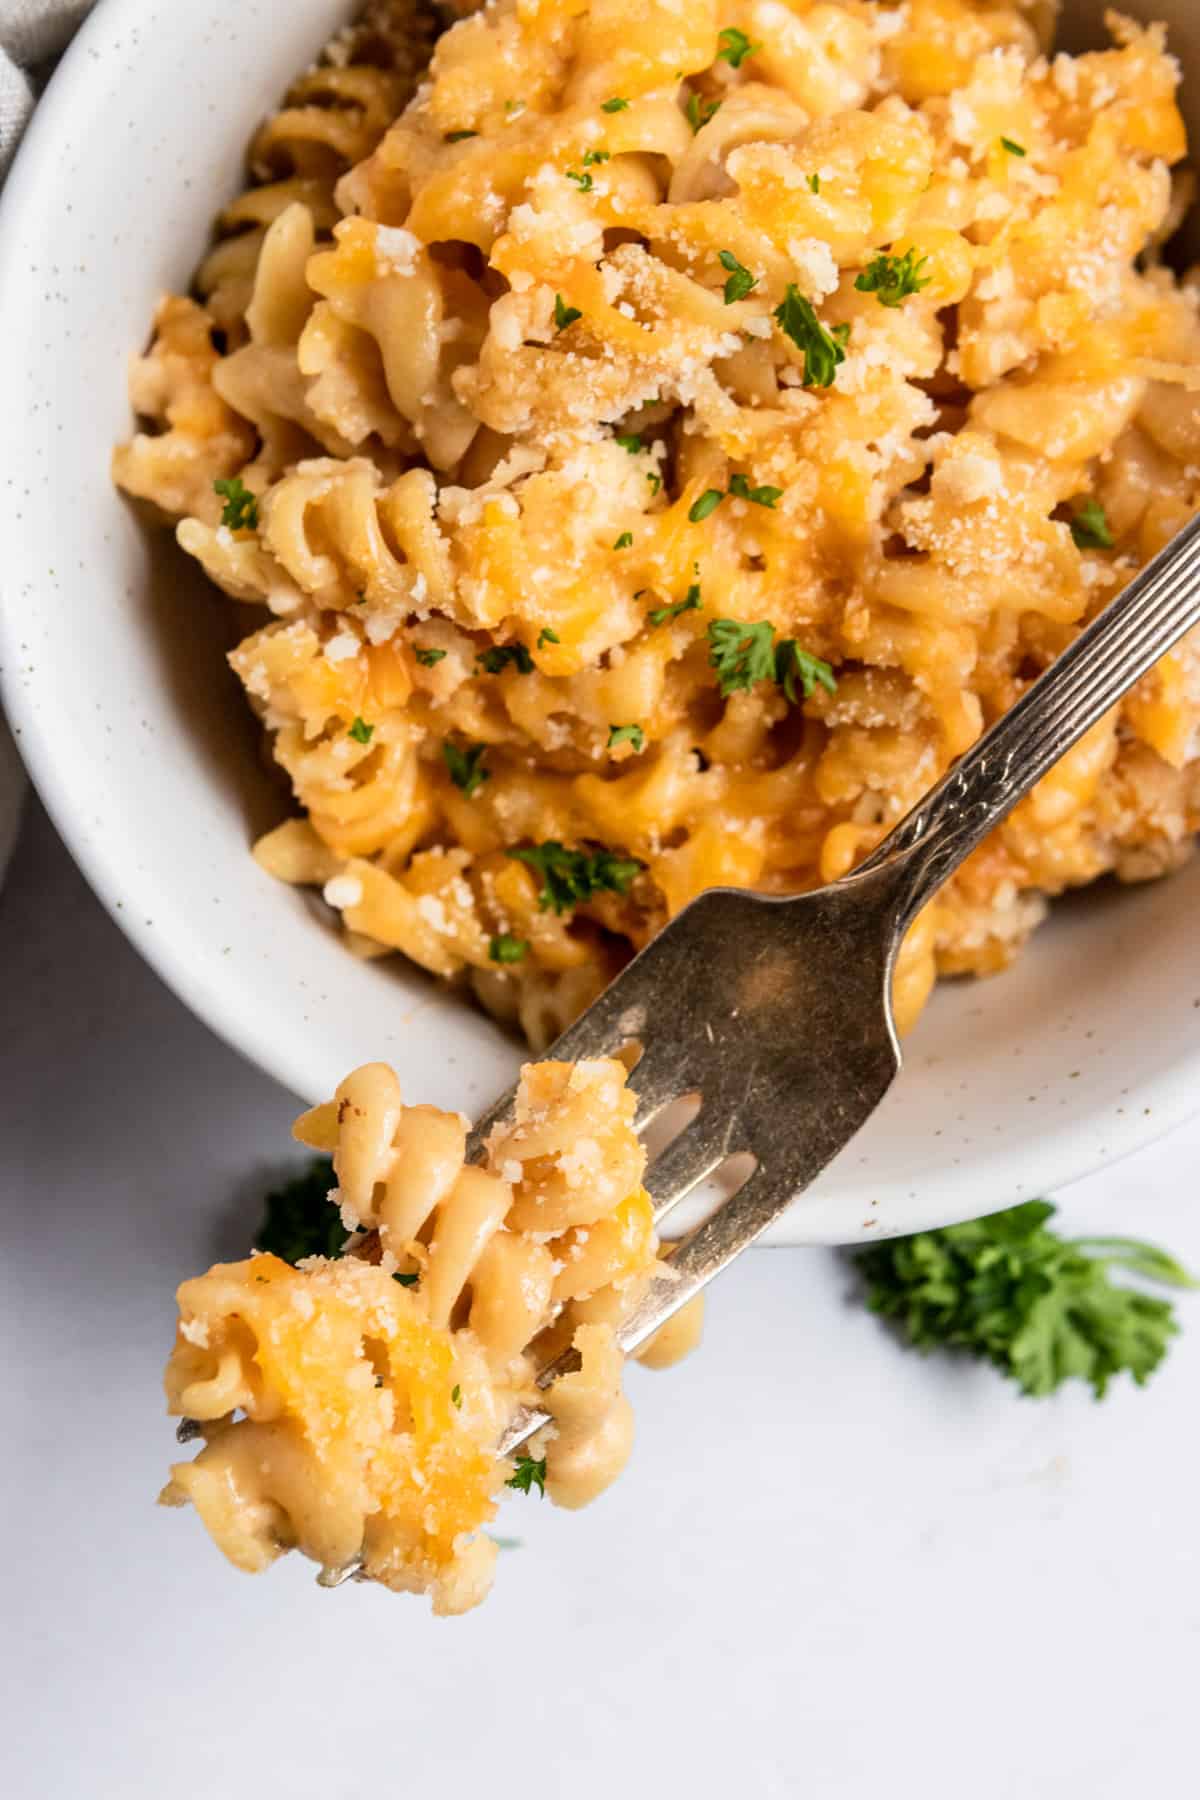 Forkful of protein mac and cheese.